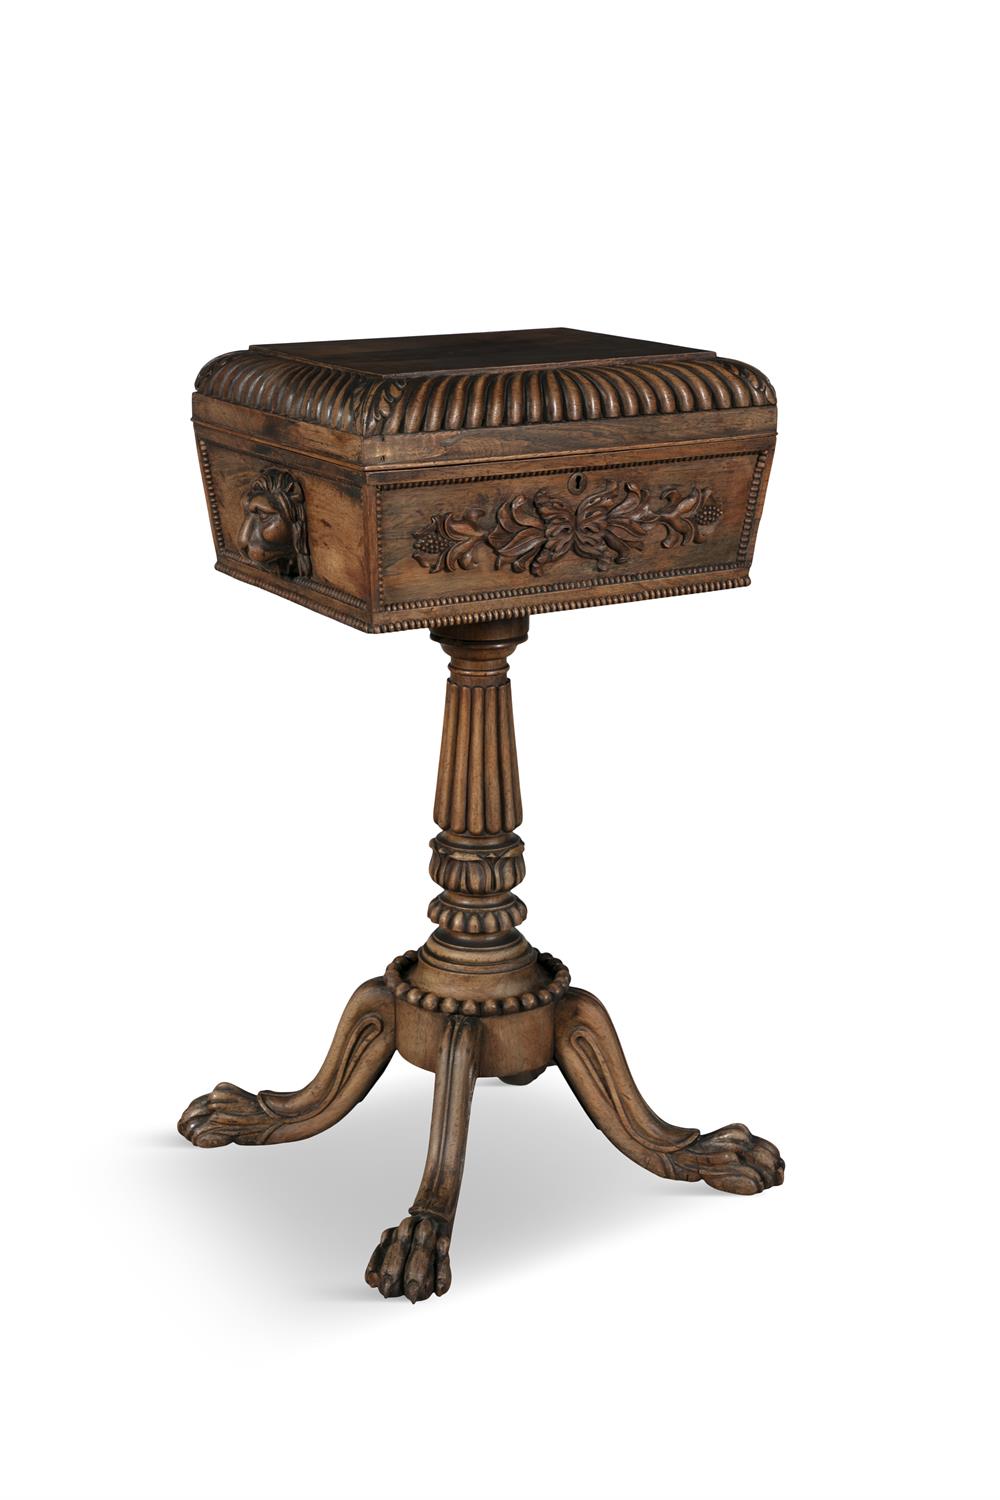 A WILLIAM IV ROSEWOOD TEAPOY OF SARCOPHAGUS SHAPE, ATTRIBUTED TO GILLOWS, the hinged lid